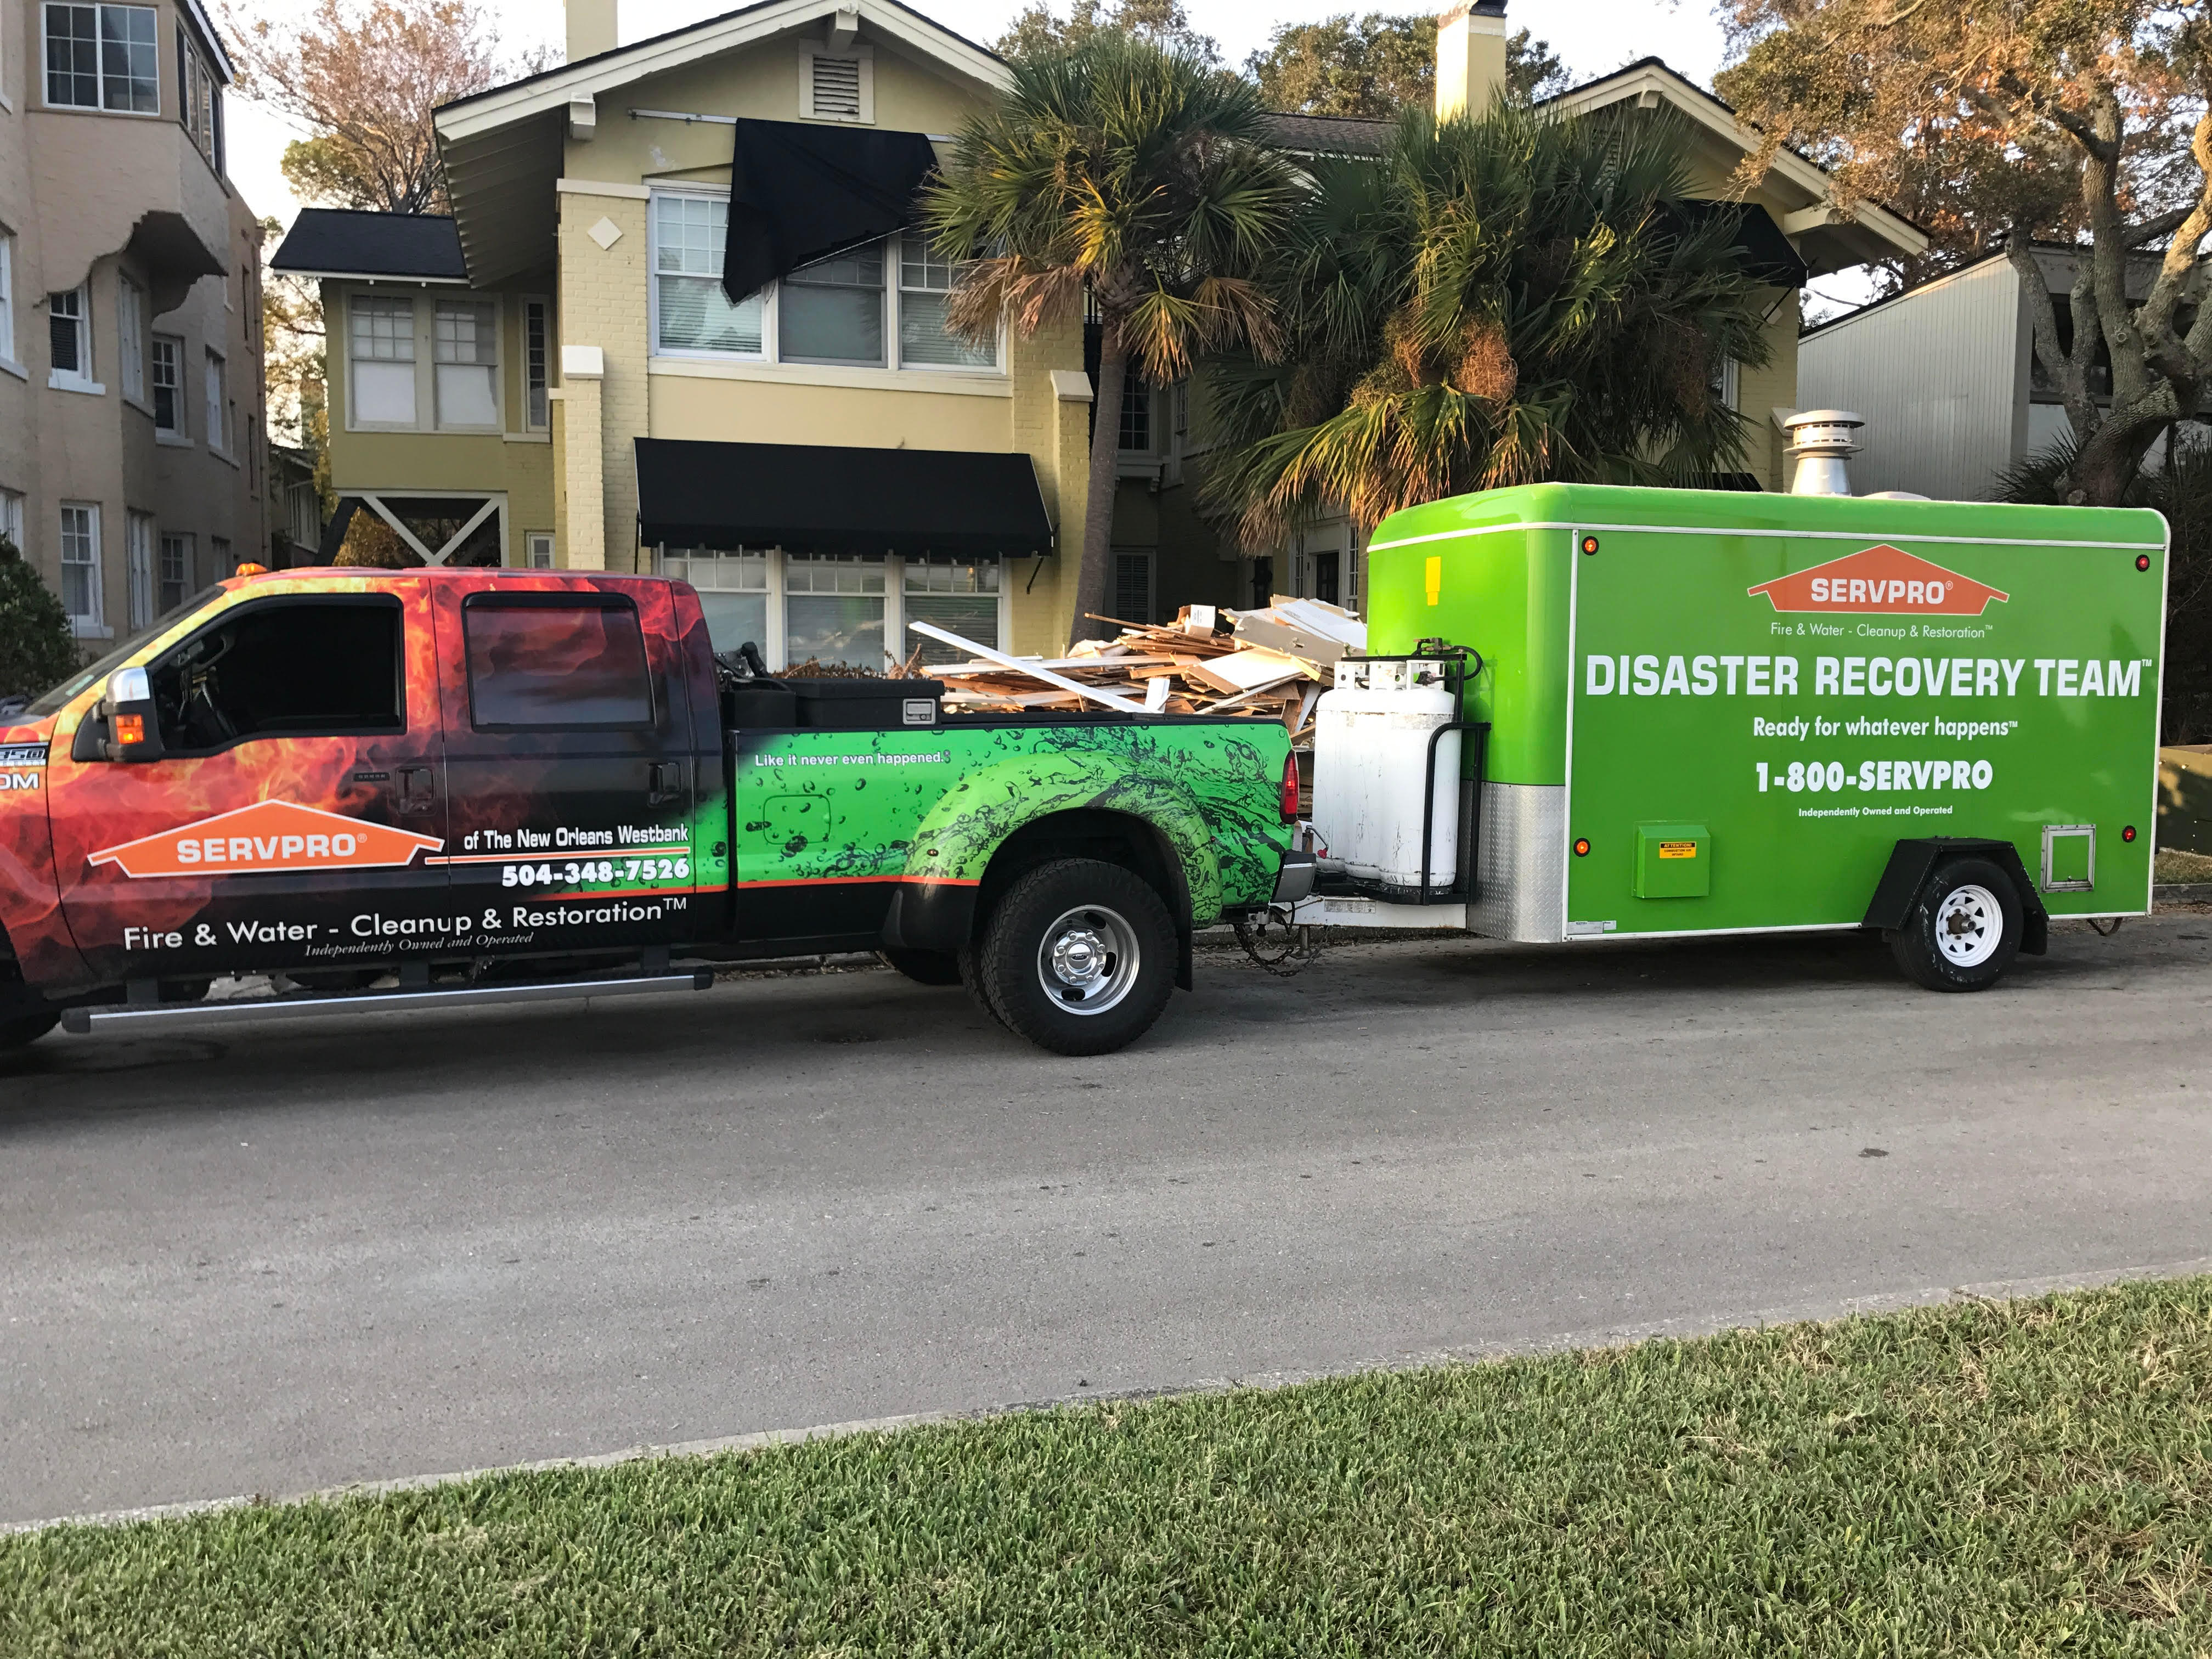 SERVPRO is Faster to Any Size Disaster!